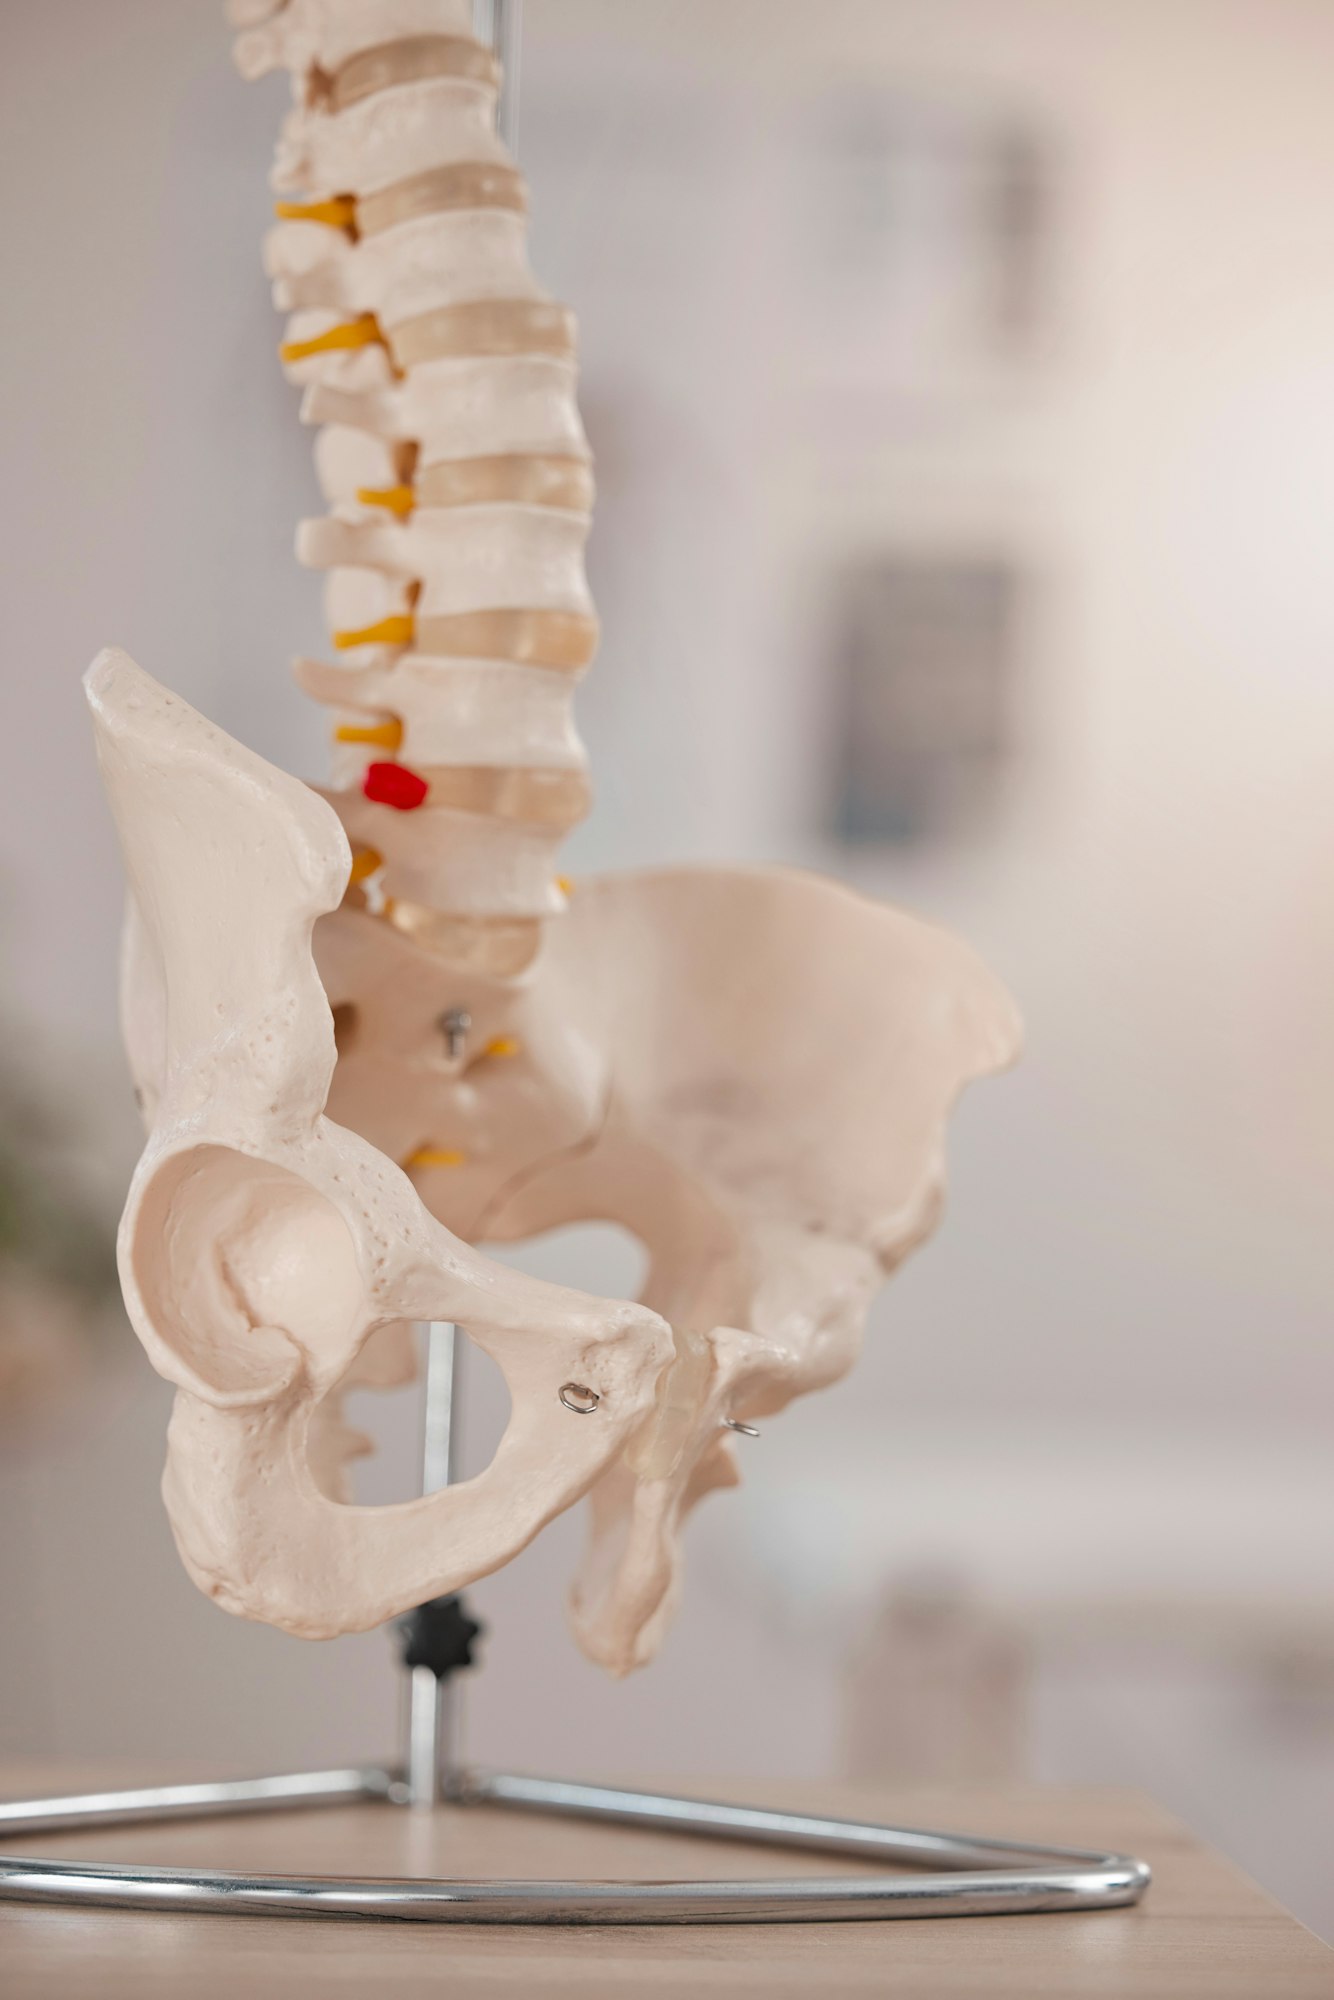 Model hip, spine and chiropractic office on table, desk or display in study, education or learning.